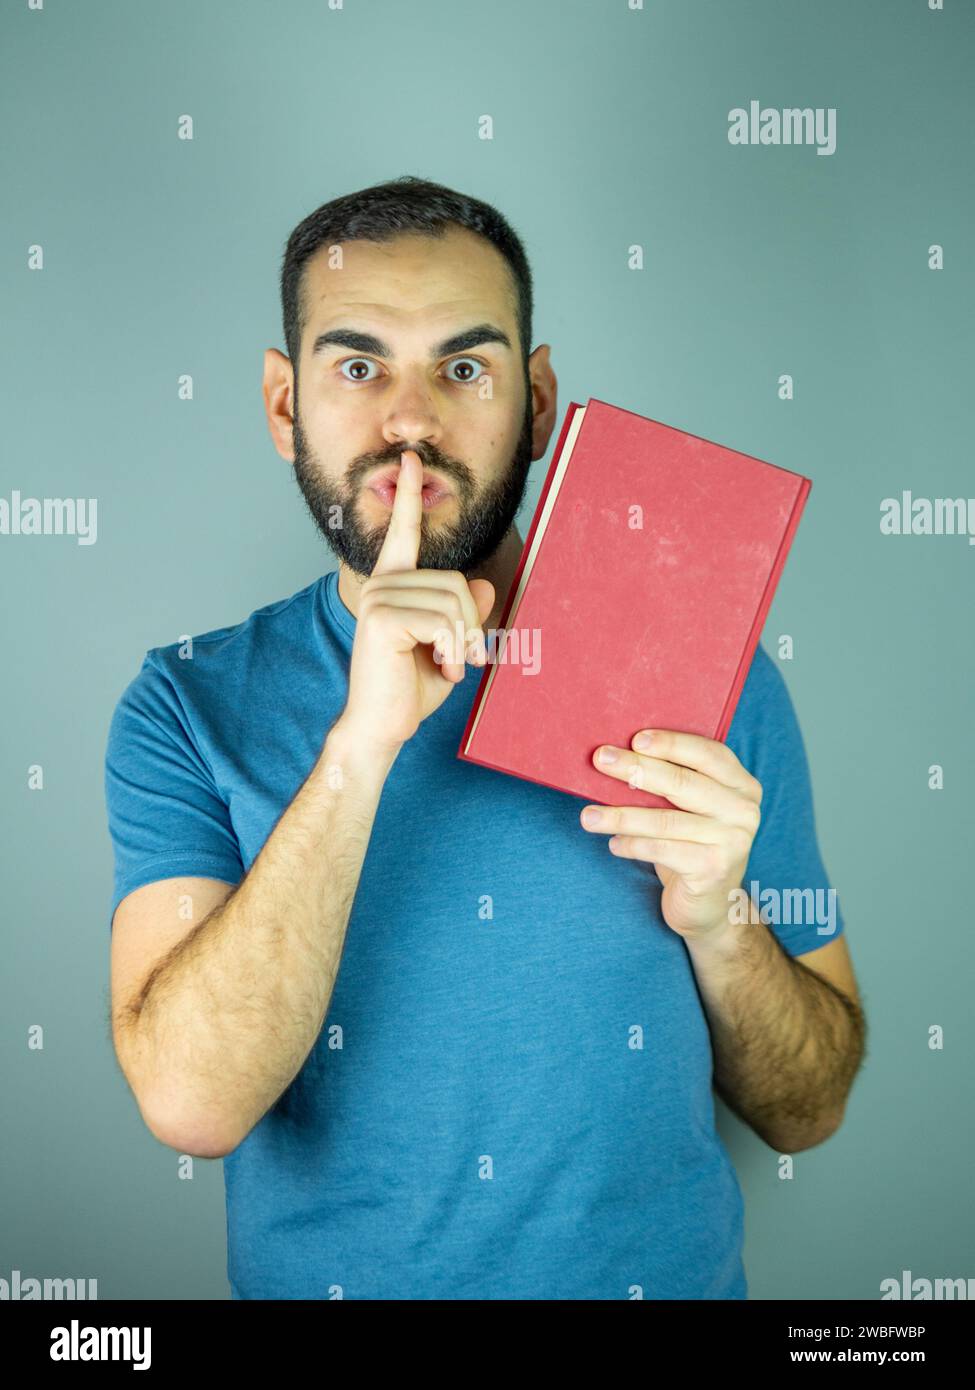 young bearded man asking for silence by gesturing with his index finger Stock Photo